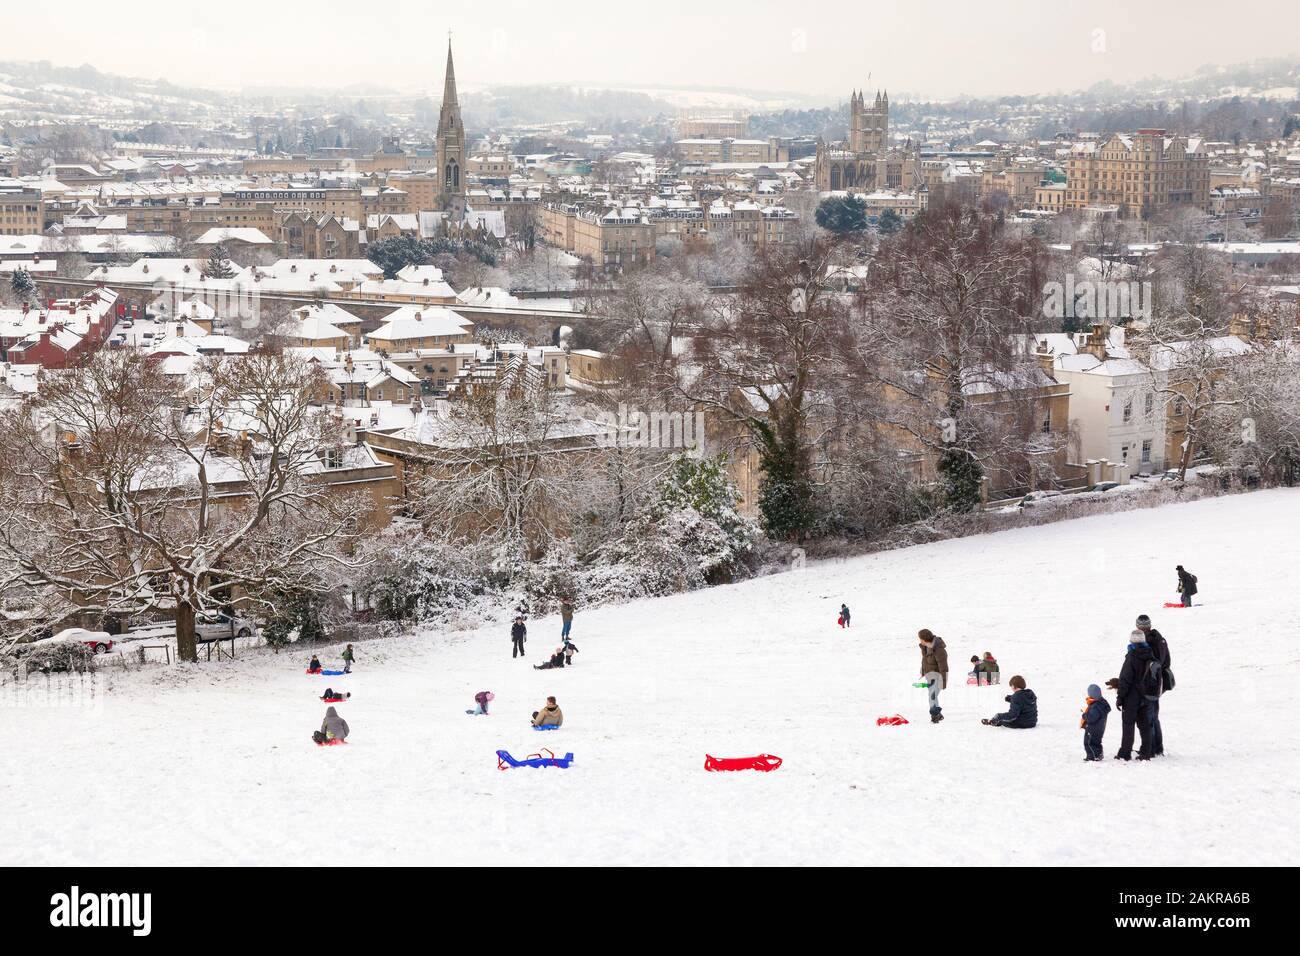 BATH, UNITED KINGDOM - DECEMBER 18, 2010 : People sledding on Bathwick Hill in the snow, with the historic City of Bath in the background. Stock Photo